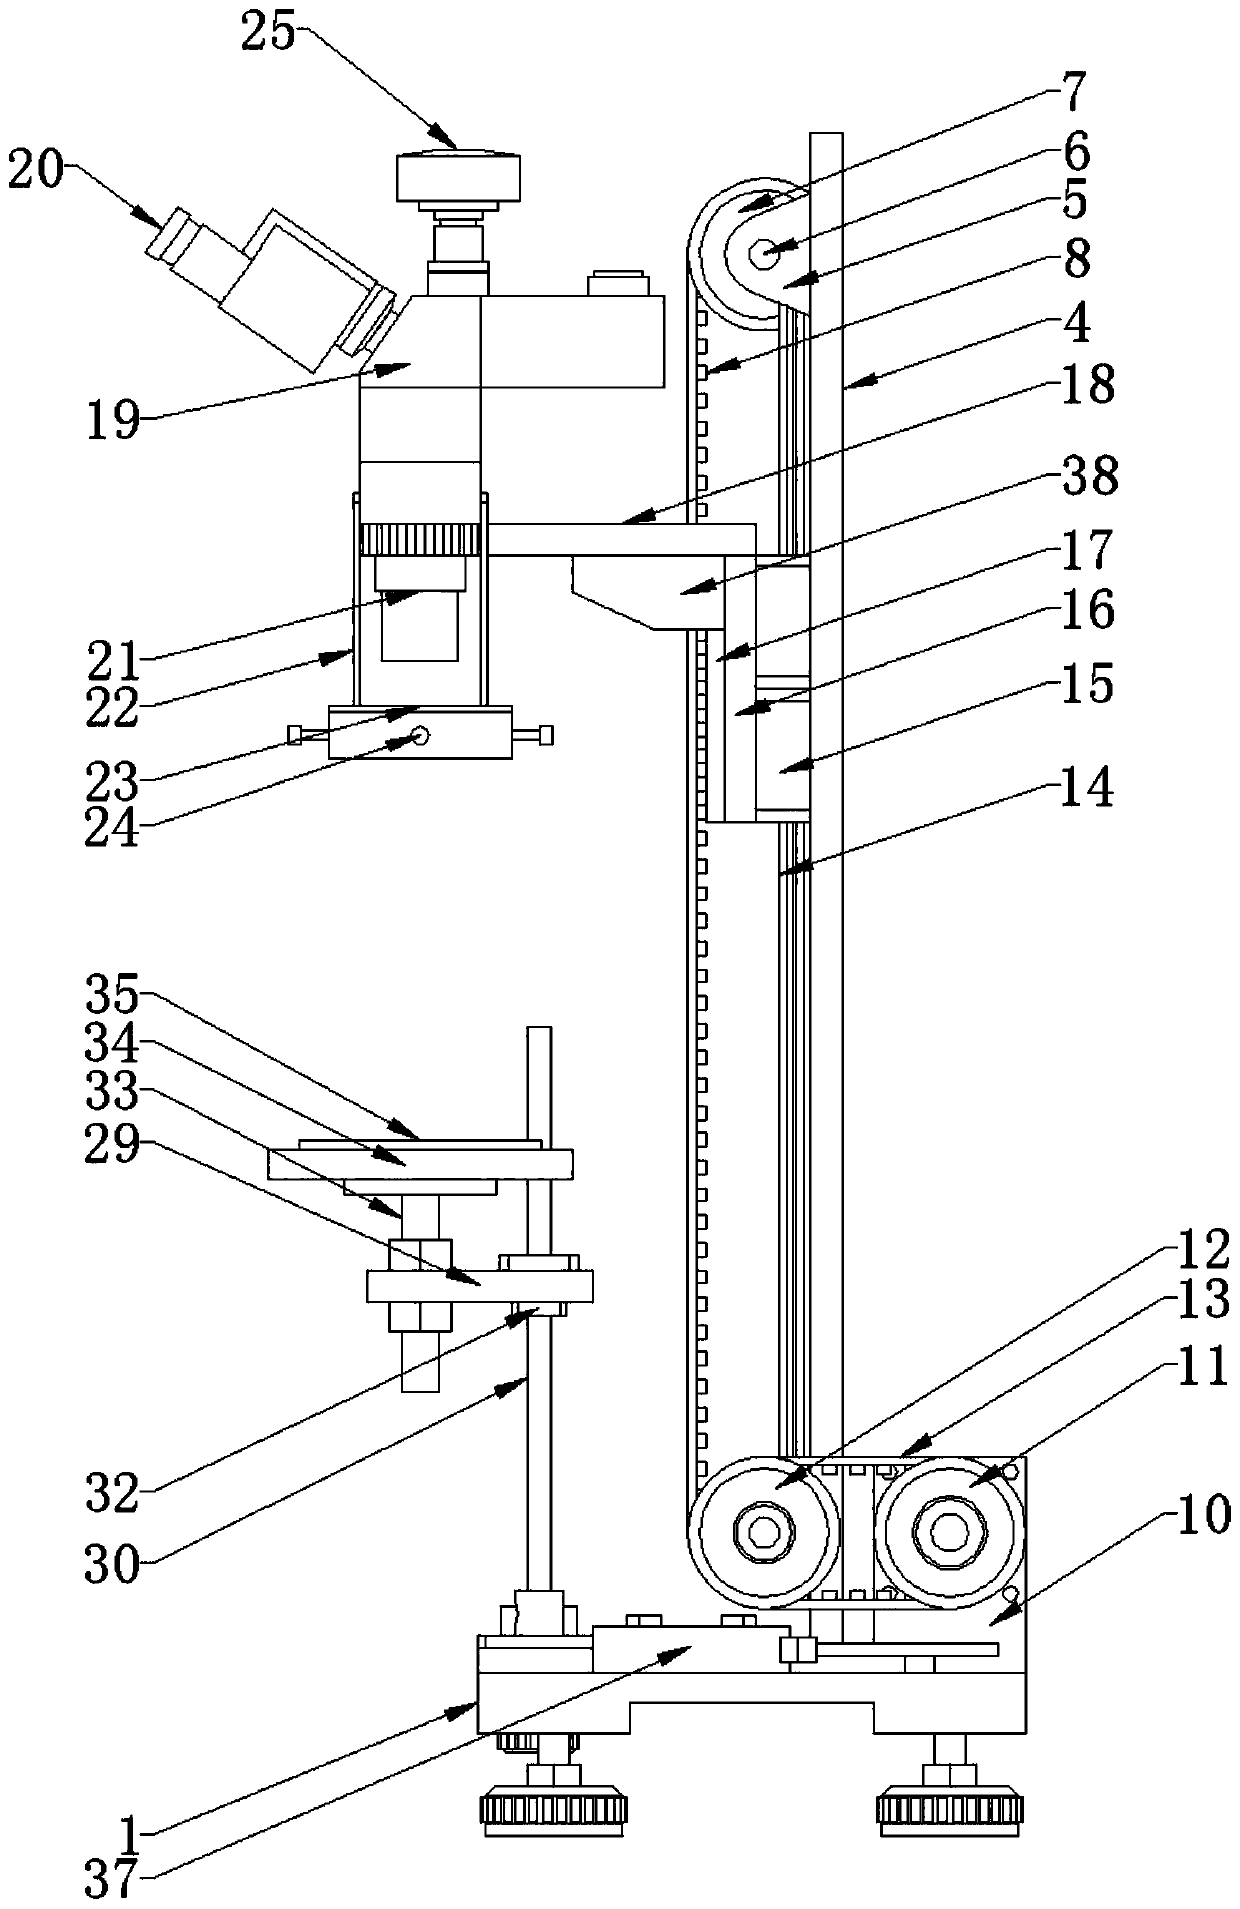 Comparison microscope provided with lifting mechanism